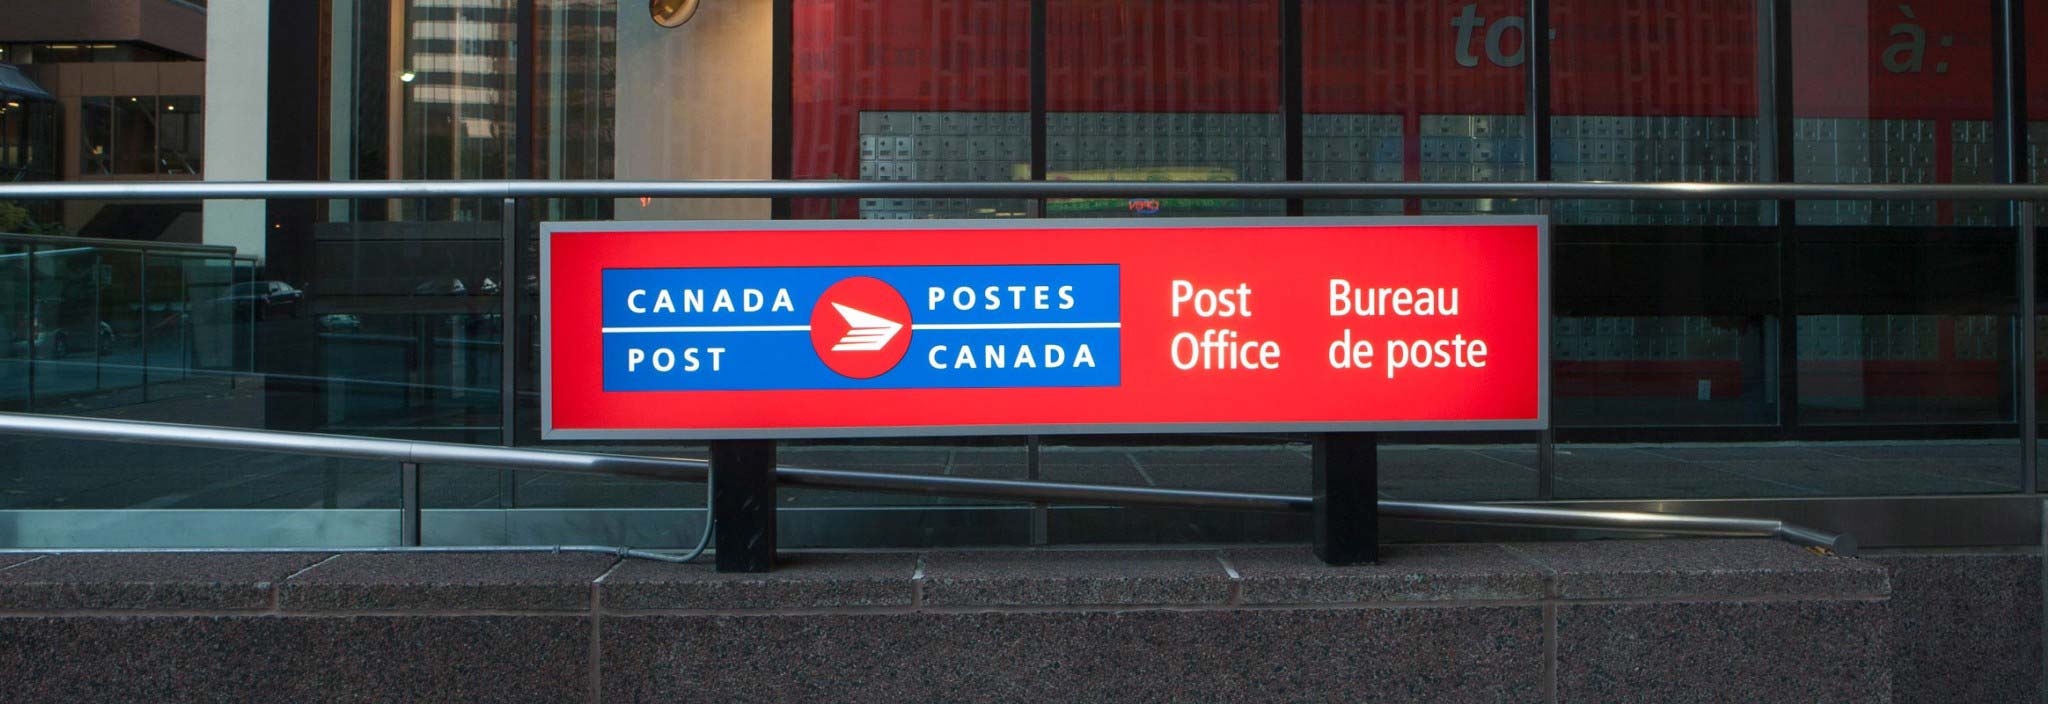 Close up of a large post office sign featuring the bilingual Canada Post logo